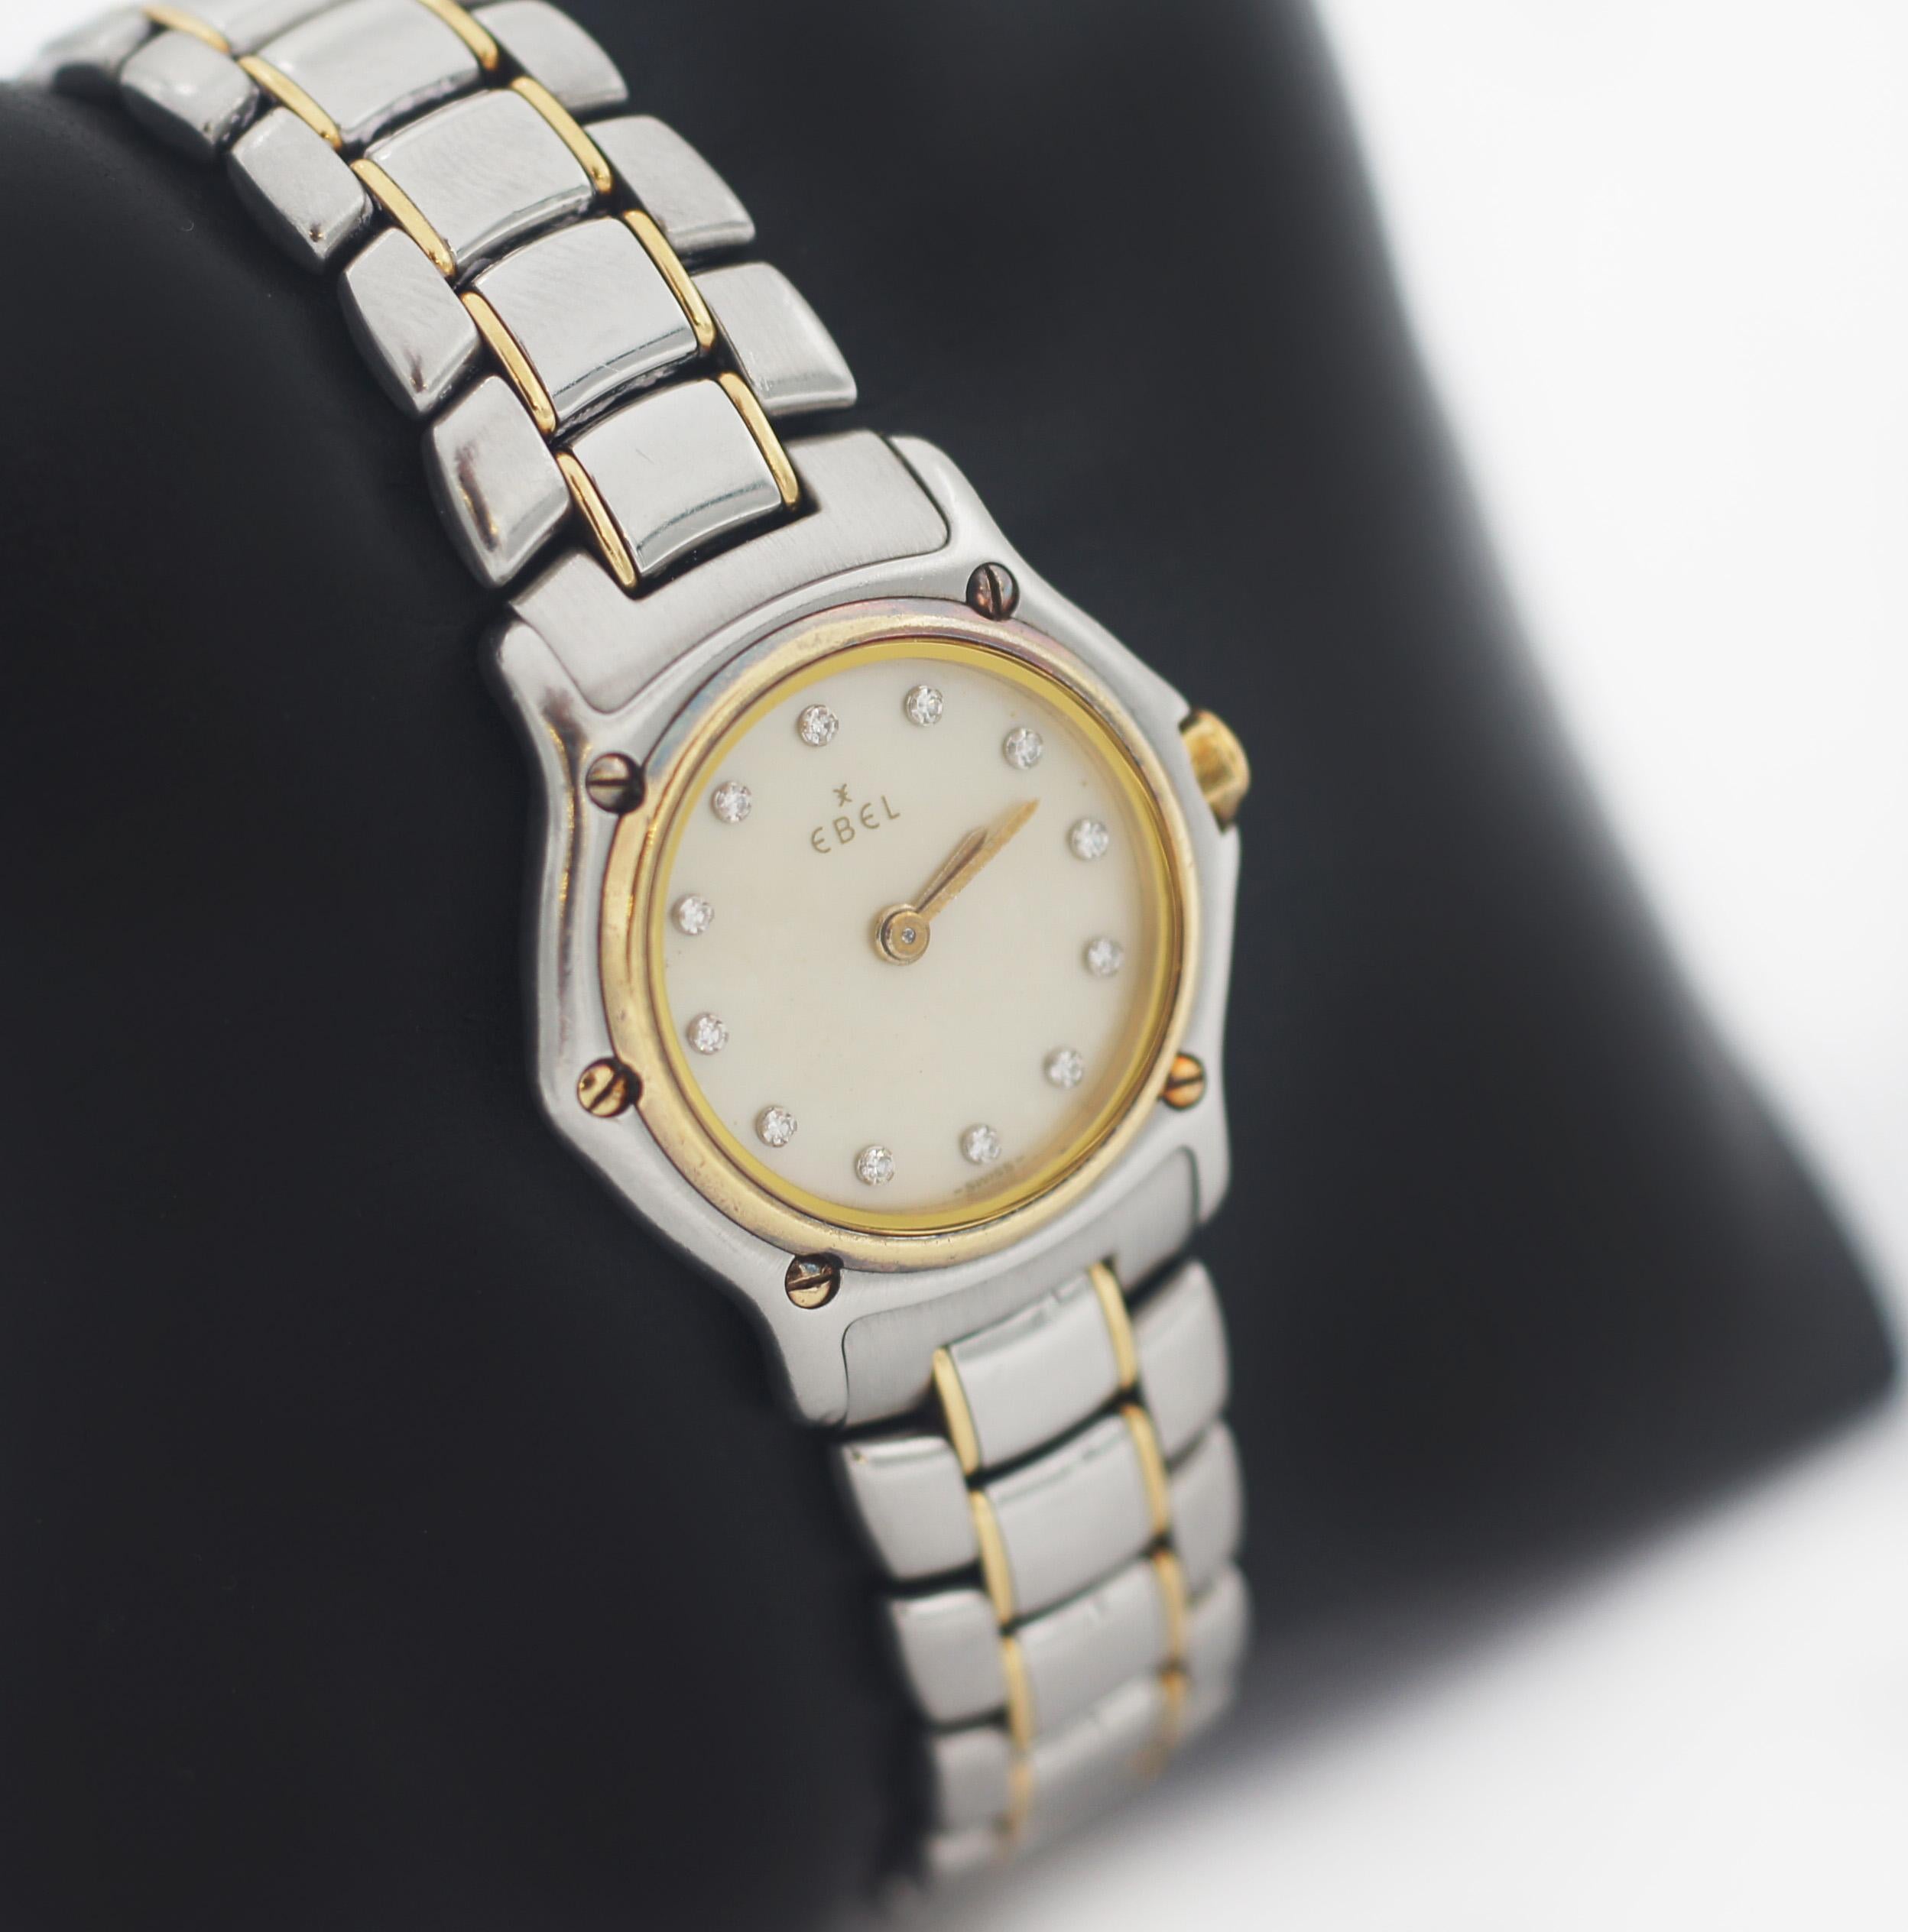 EBEL
Stainless Steel & 18K Gold Bezel
2 tone
Mother of pearl Dial
Diamond Markers
Approx. Case 21mm
Swiss Watch
In great looking and working condition, visible wear consistent with time and some use. 
Such as light scuff, scratches or fading. 
See